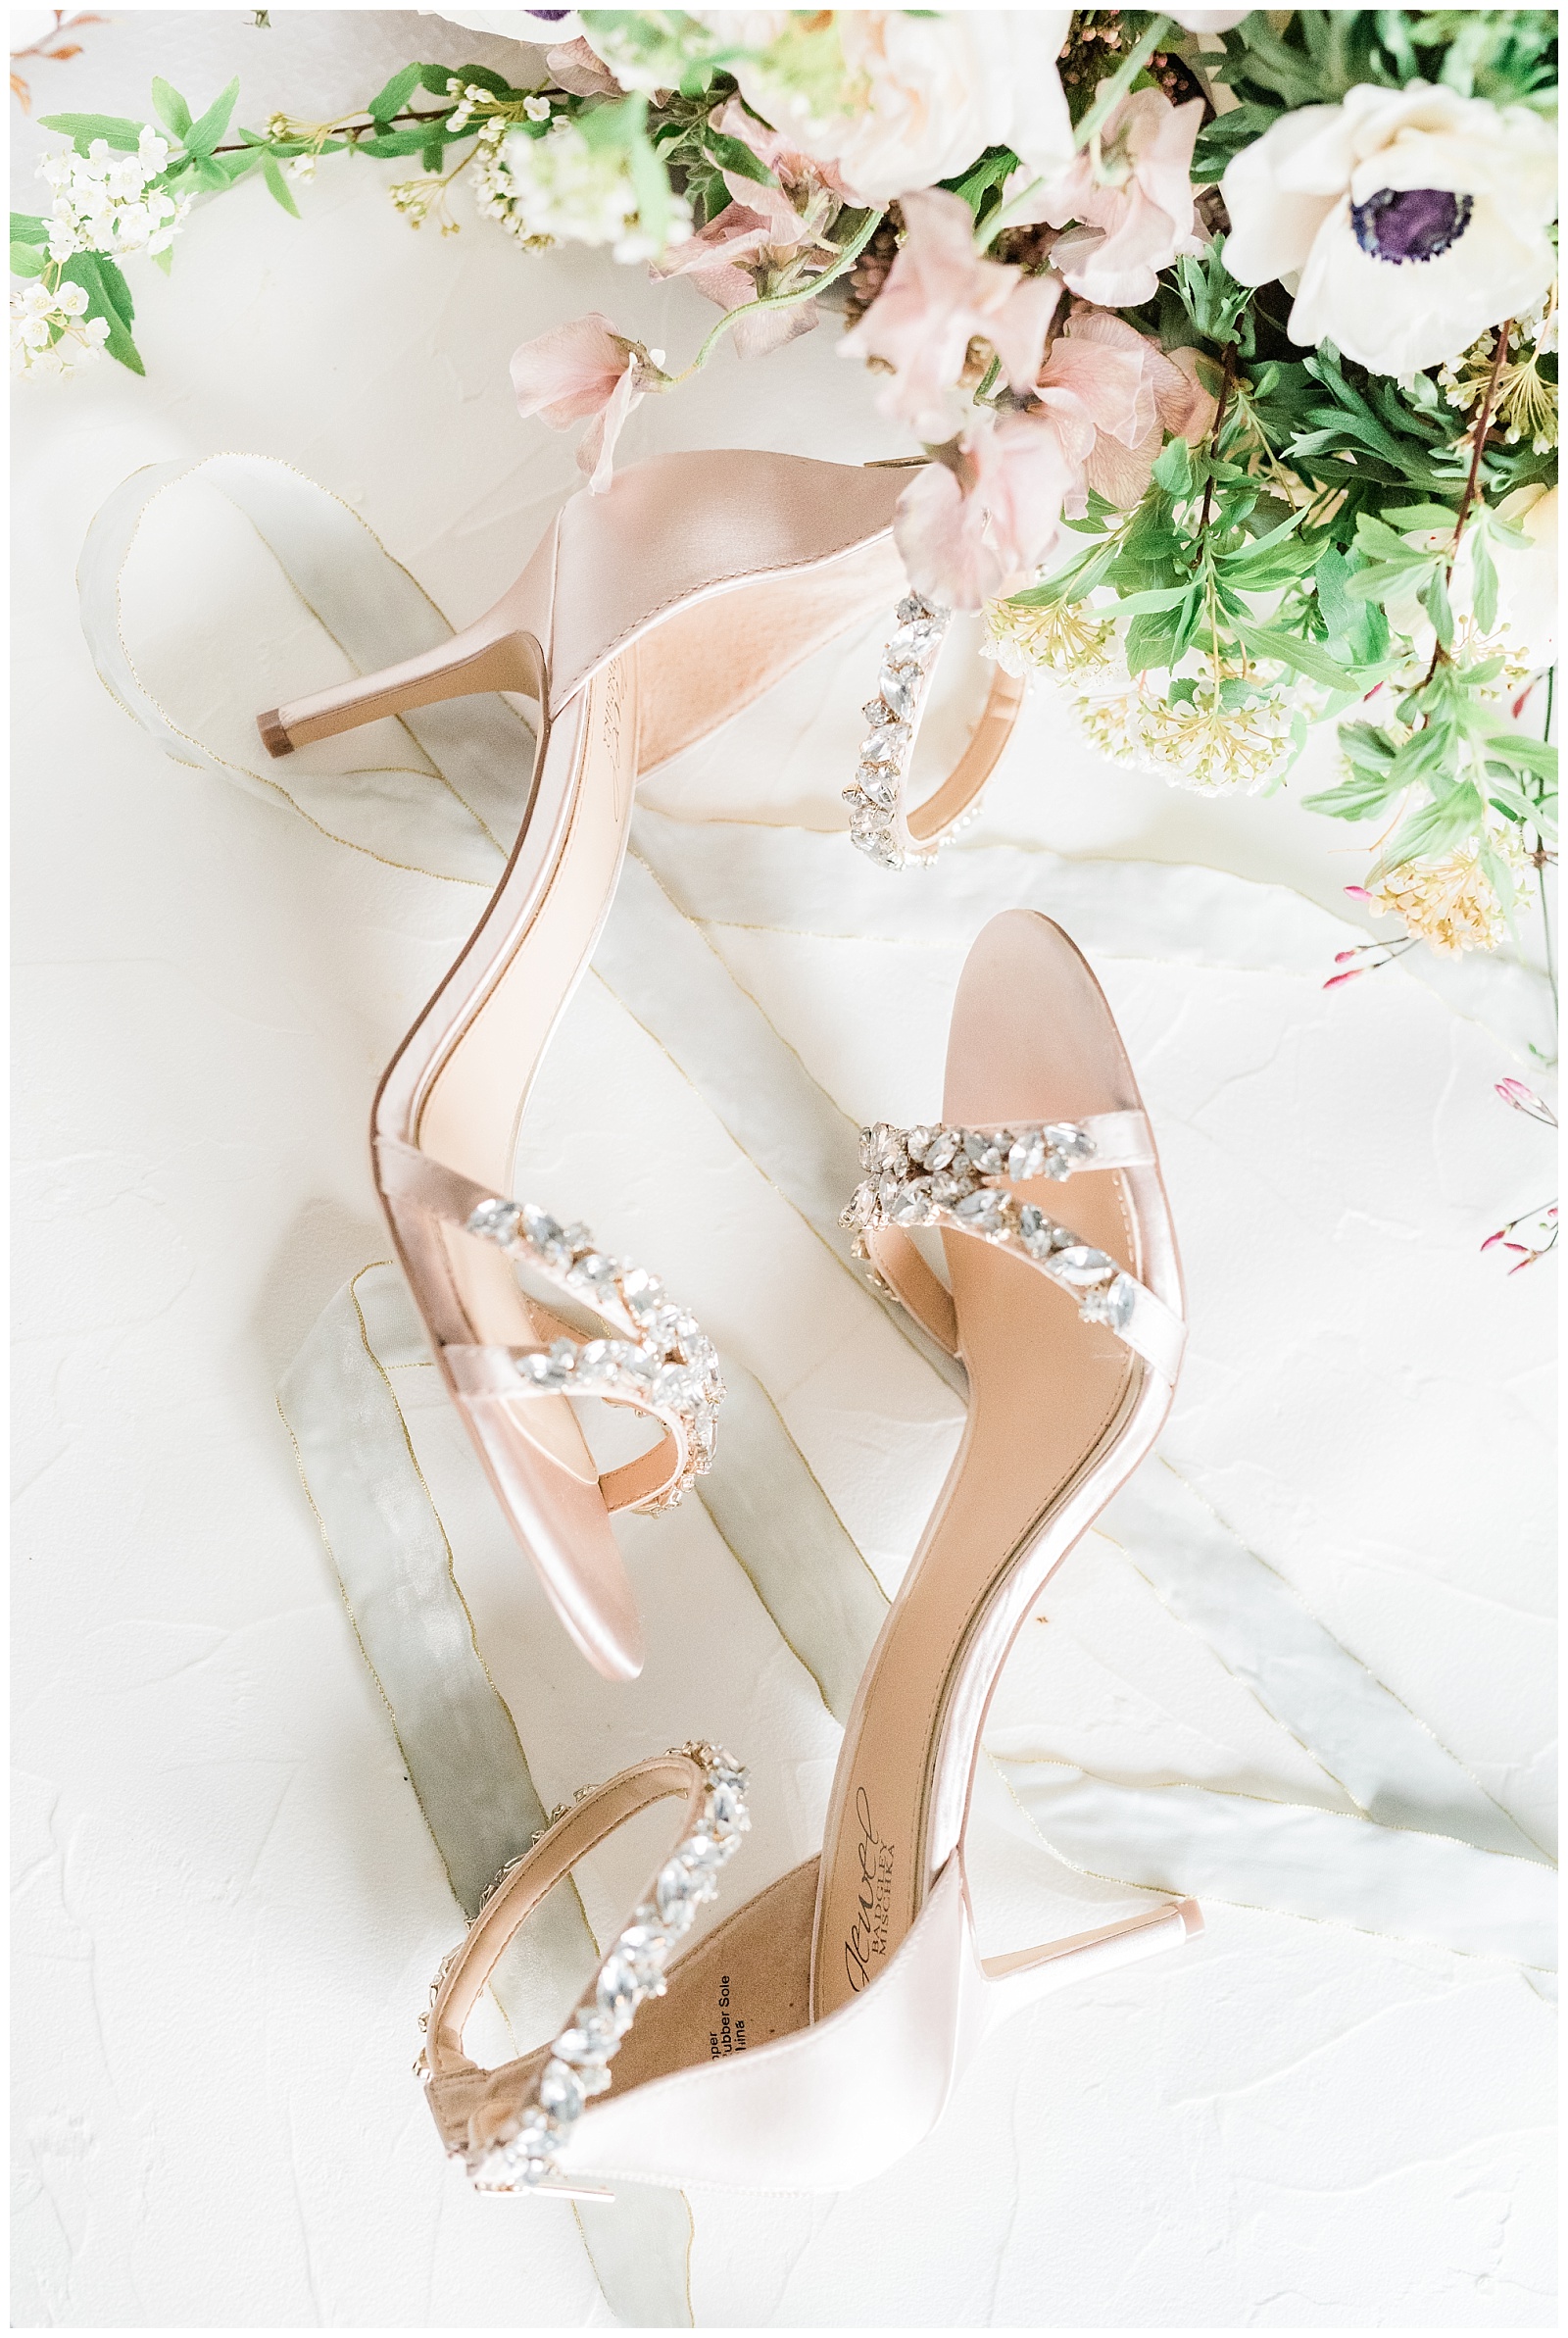 Blush Badgley Mischka high heels styled with a ribbon and bouquet.